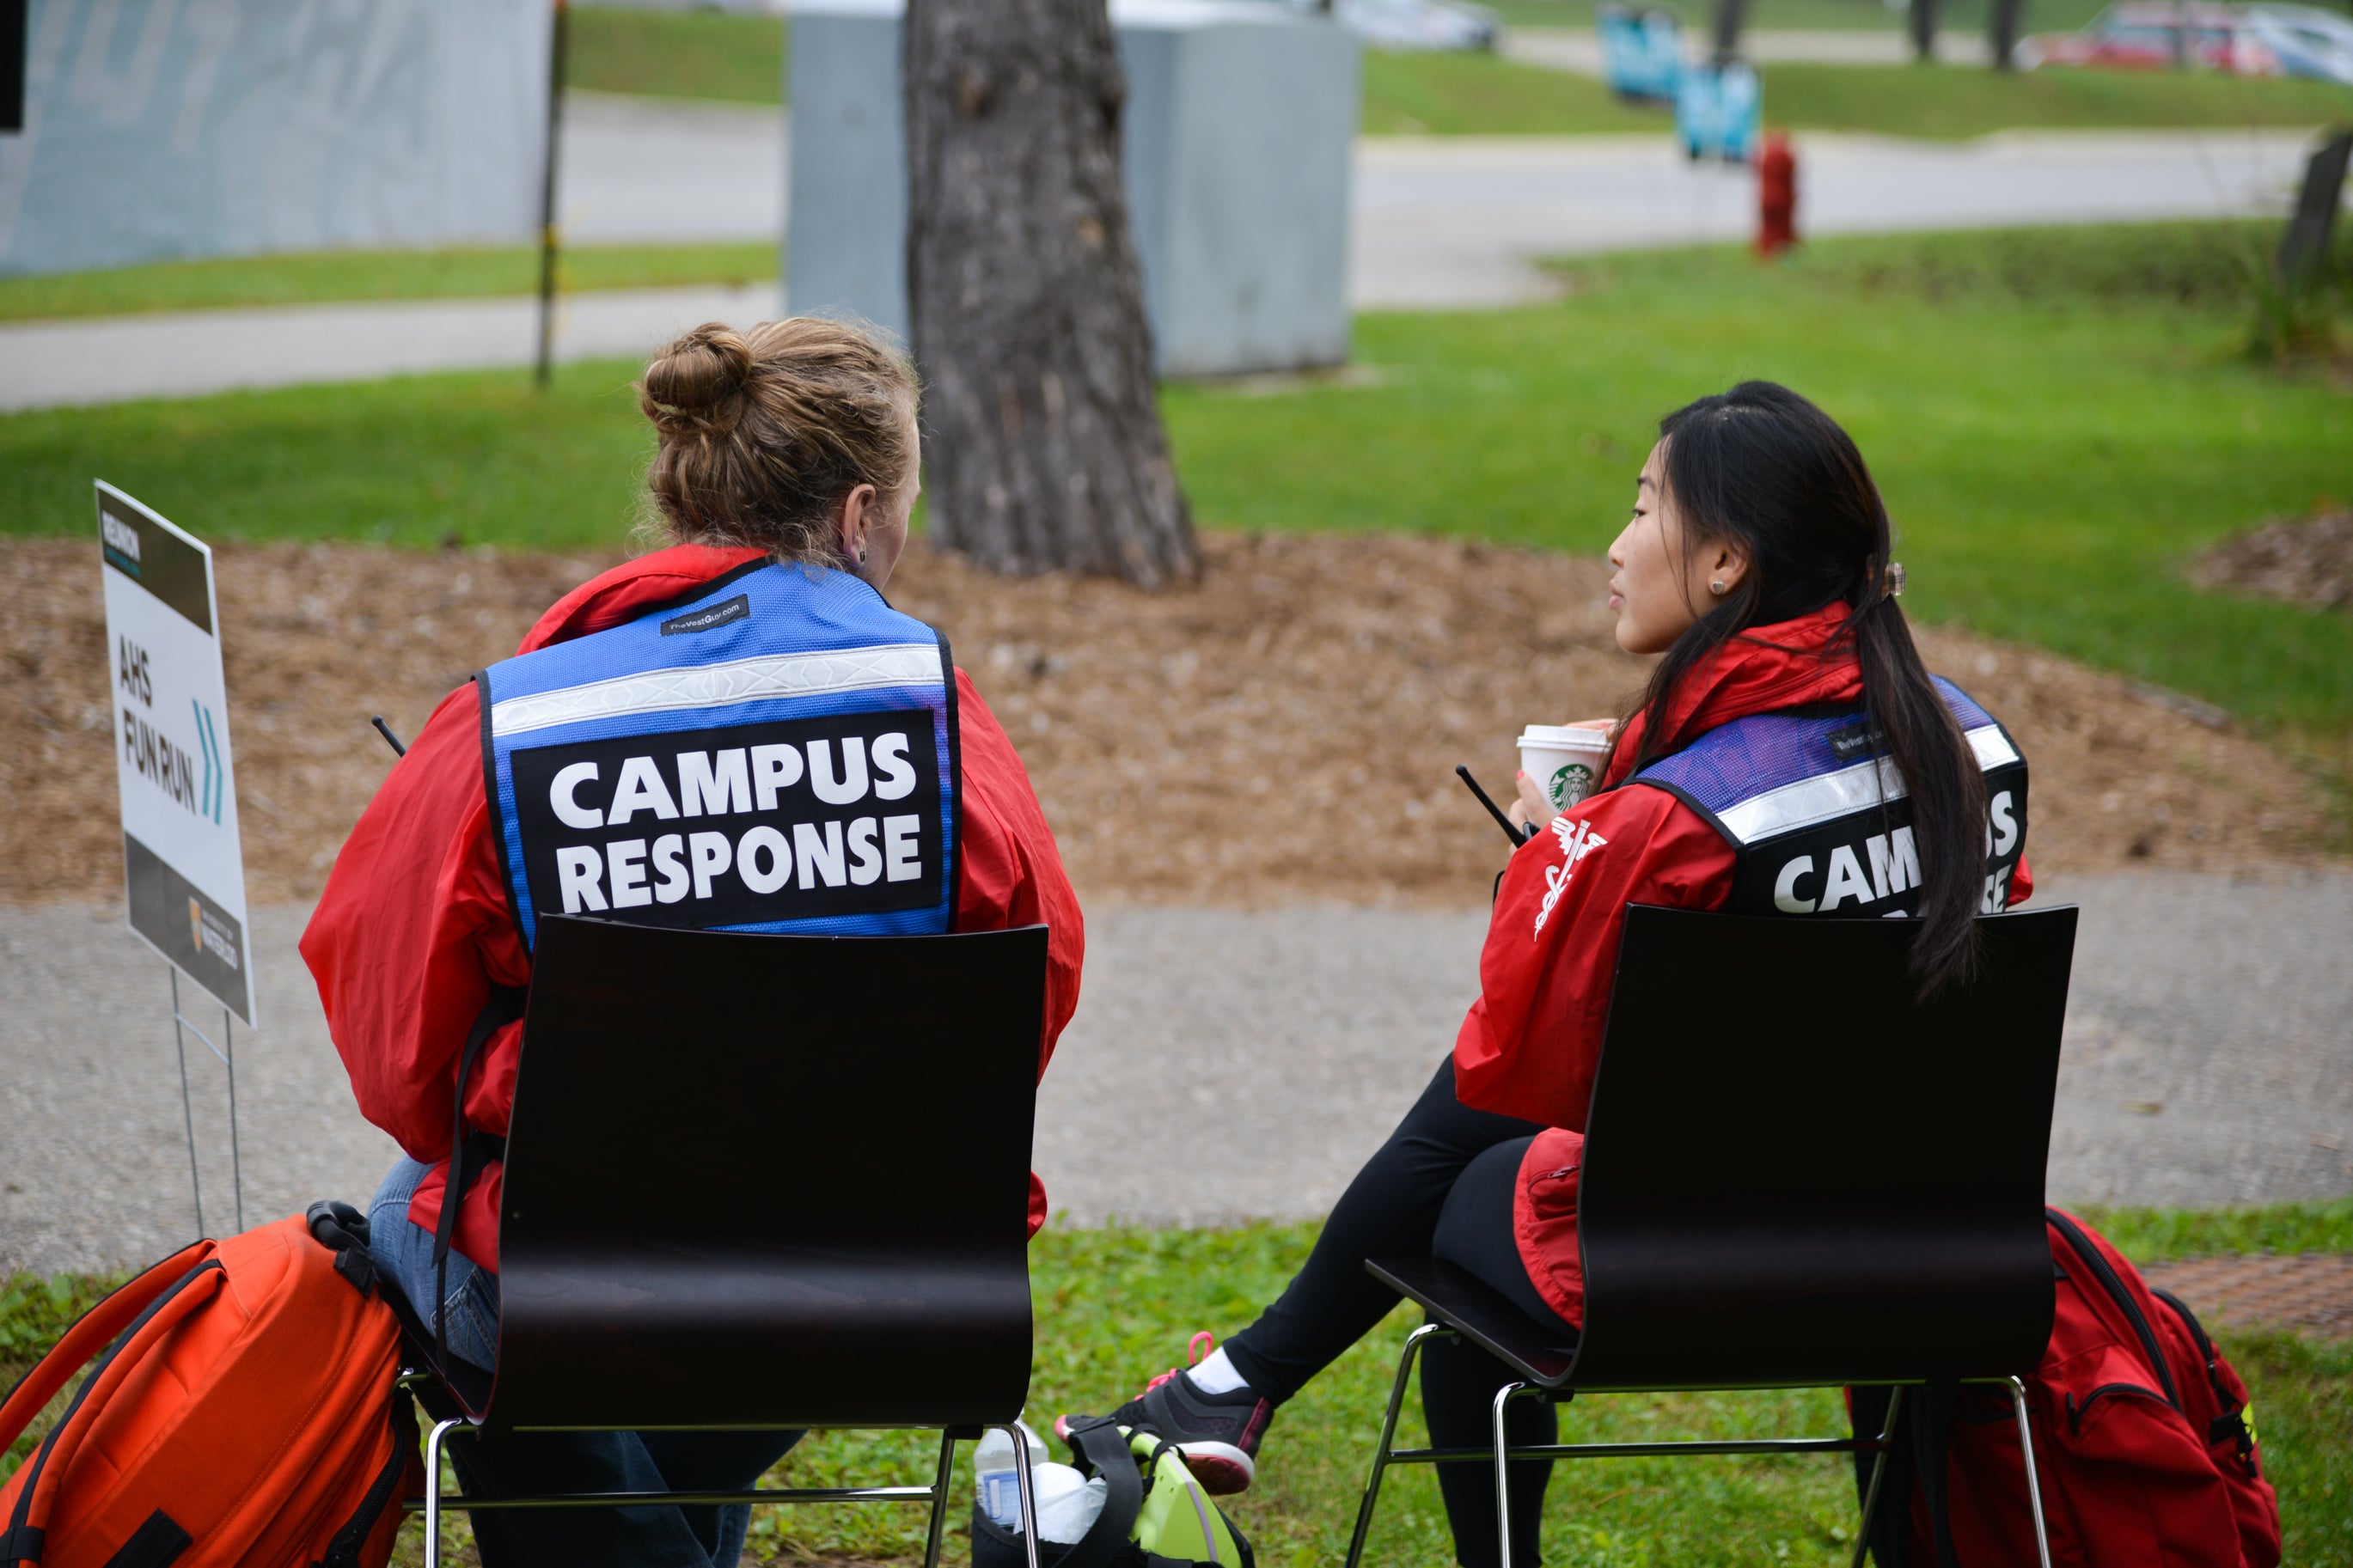 Two campus response team members sitting on chairs.